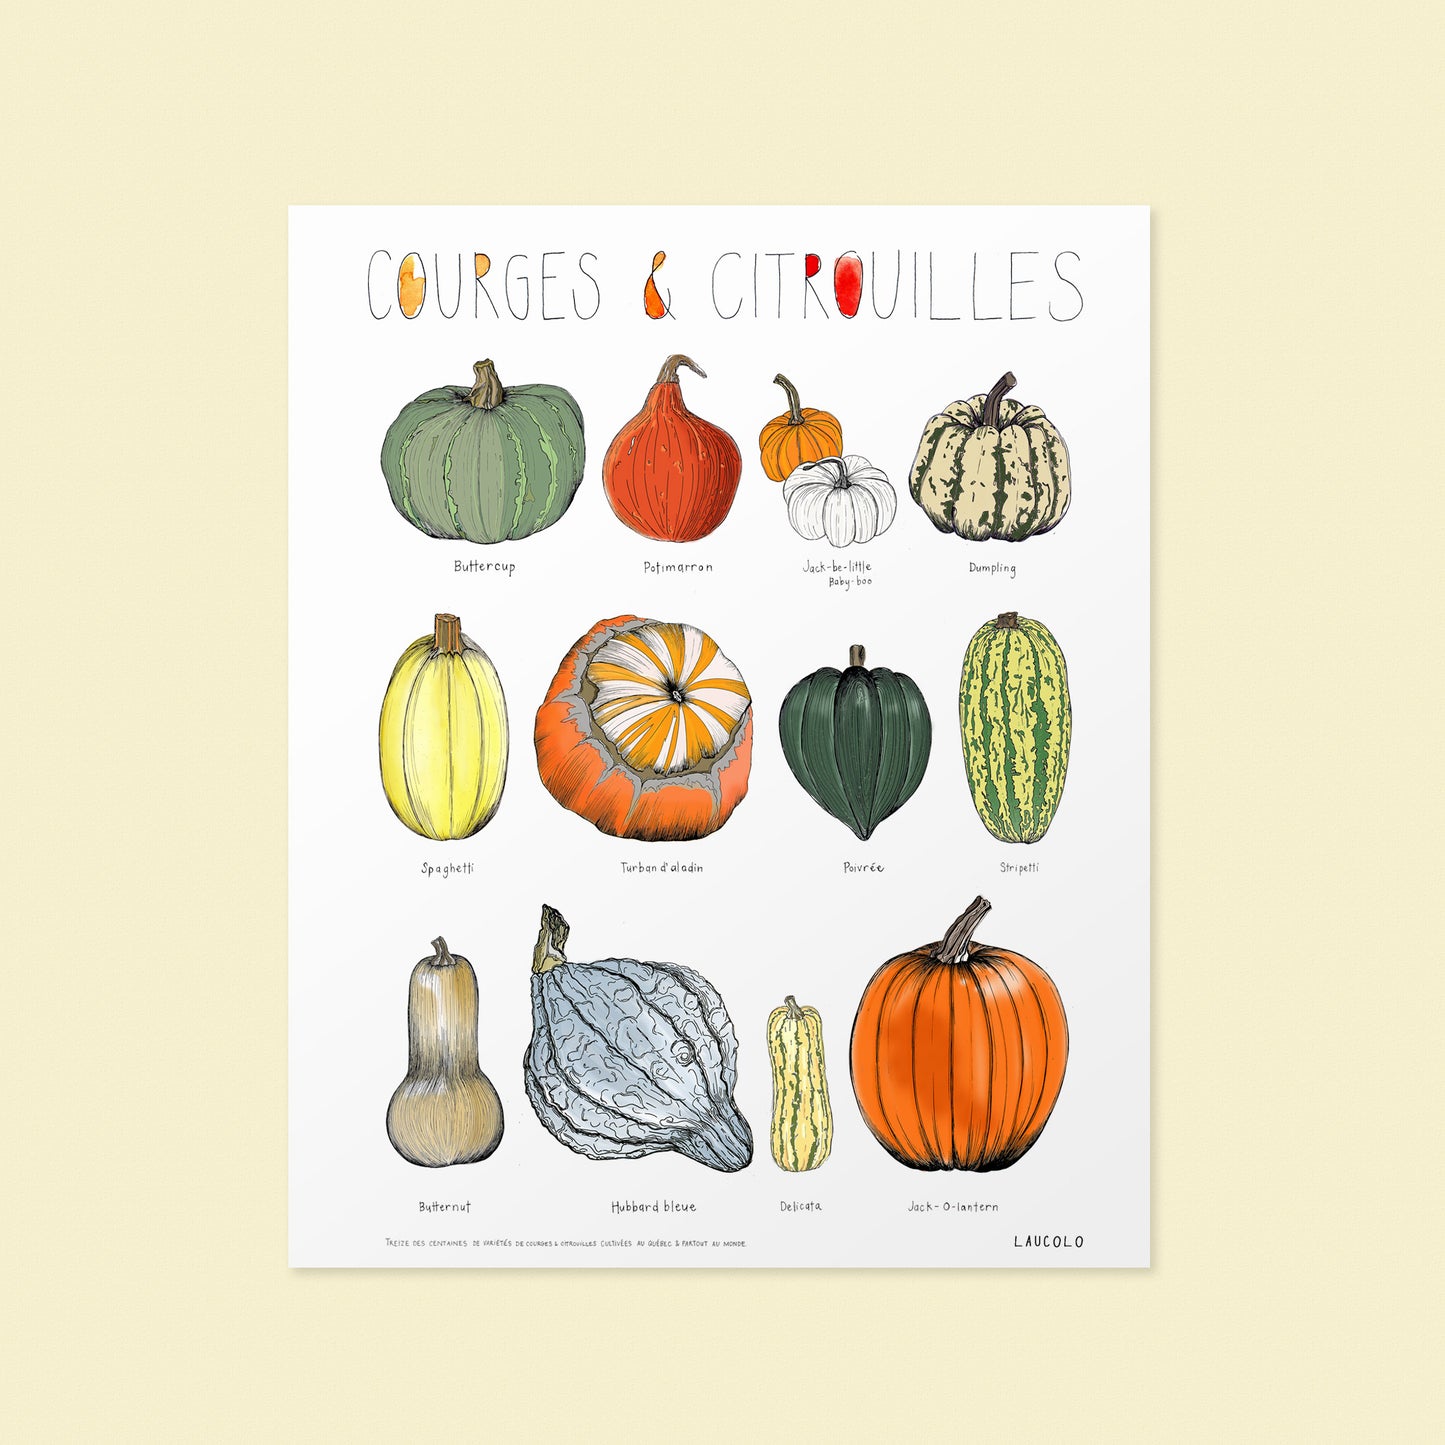 Pumpkins and gourds illustration poster by Laucolo